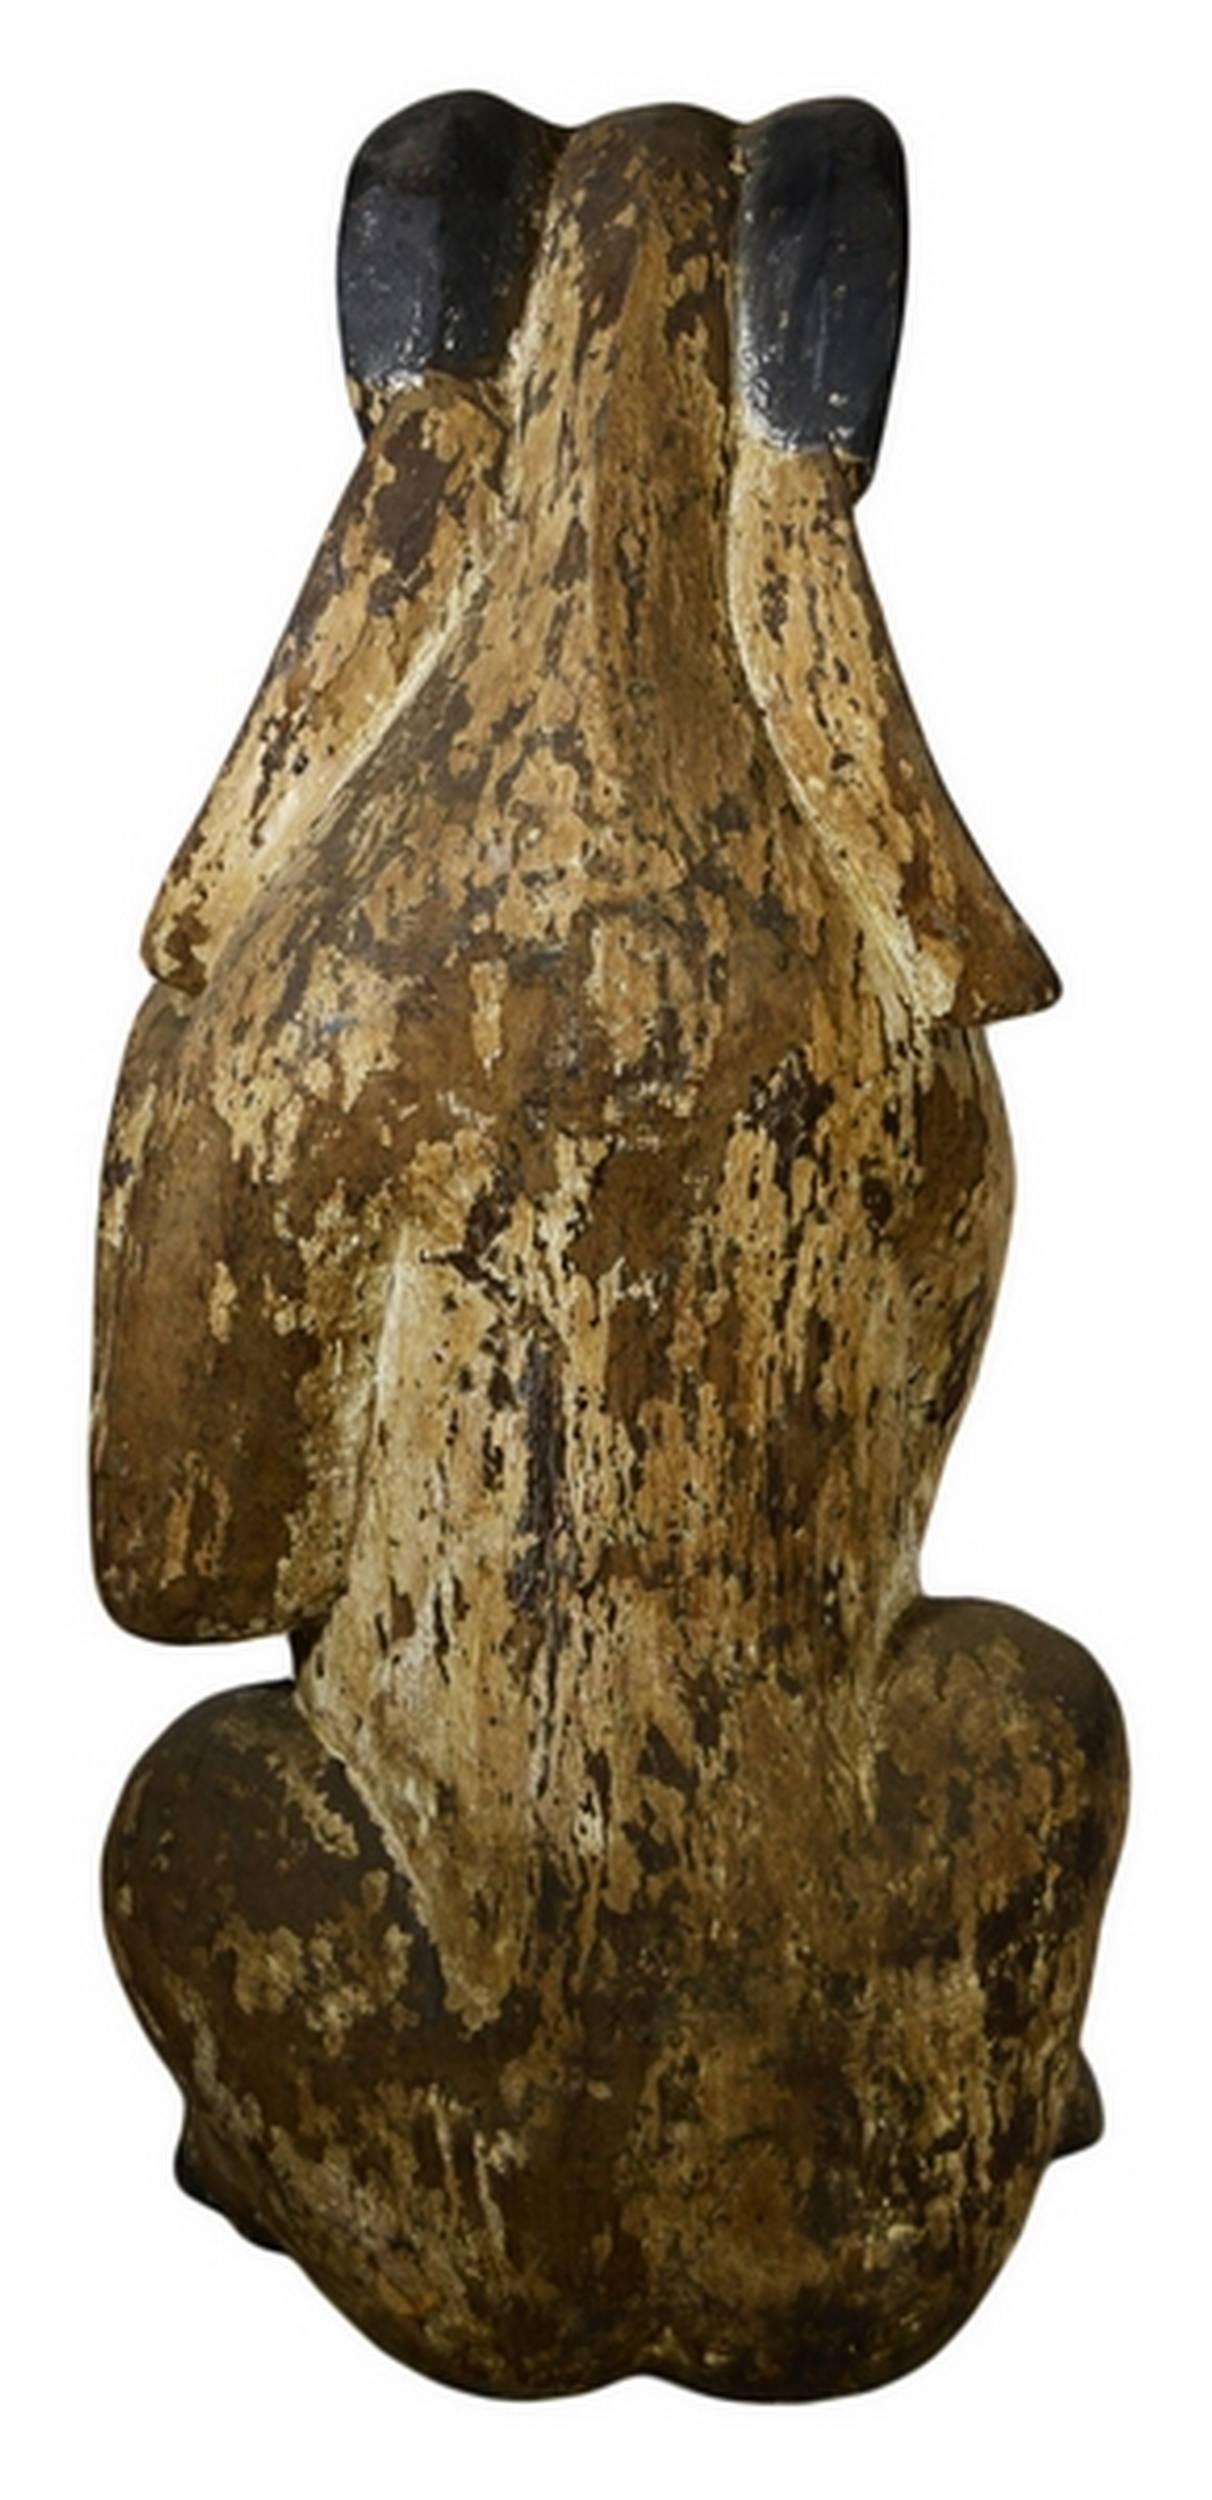 A 19th century seated goat statue hand-carved in wood from Burma. This hand-carved statue depicts a goat, seated on his hind legs with his front legs pulled up in an almost squirrel like position. The animal showcases many details, enhanced by the